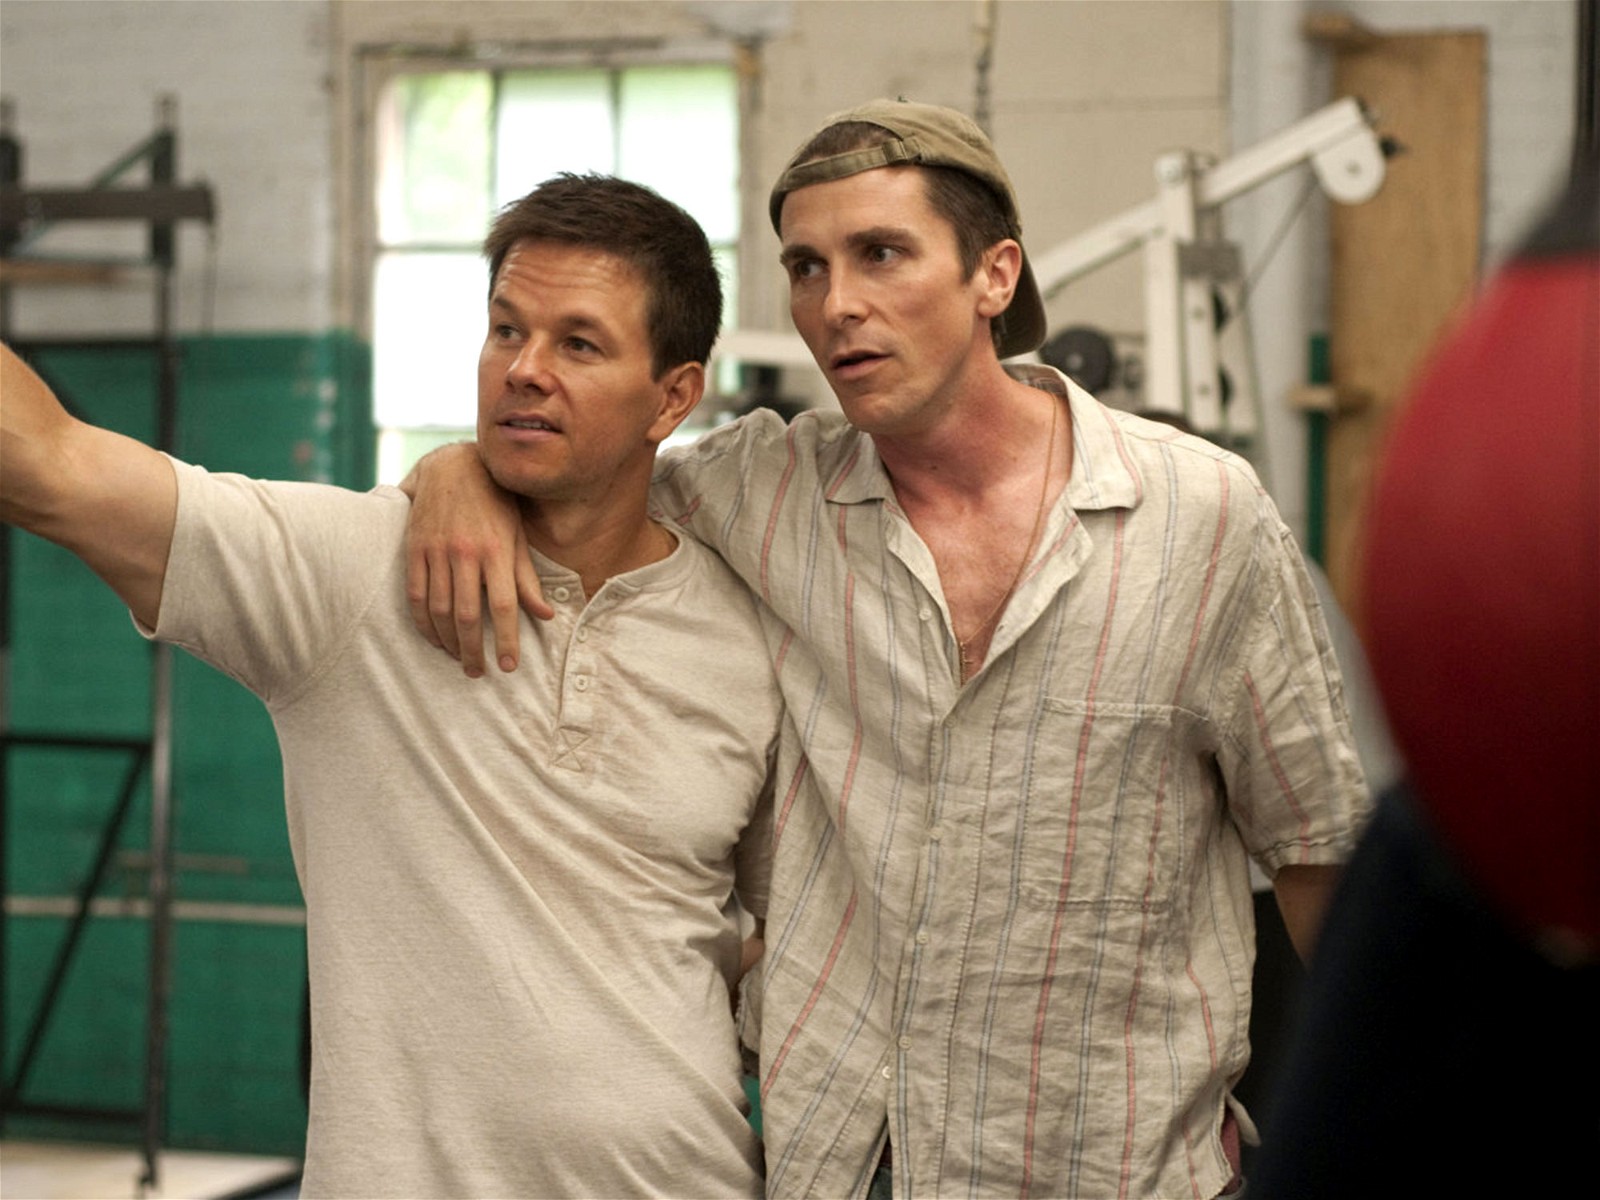 Christian Bale and Mark Wahlberg in The Fighter